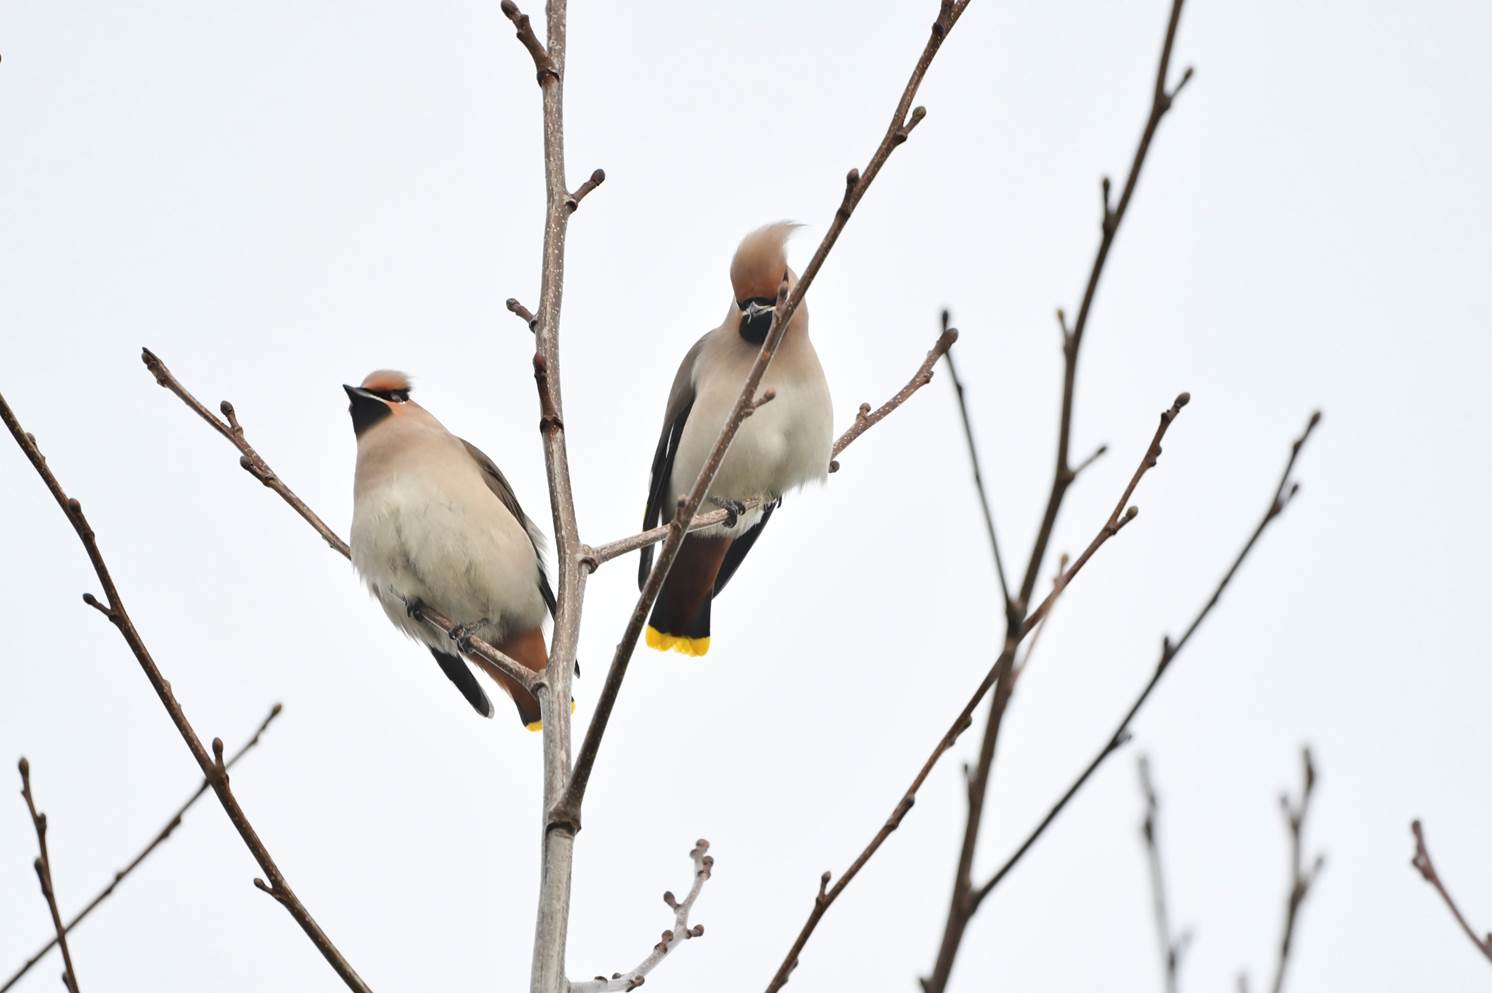 Birds sitting on a tree branch

Description automatically generated